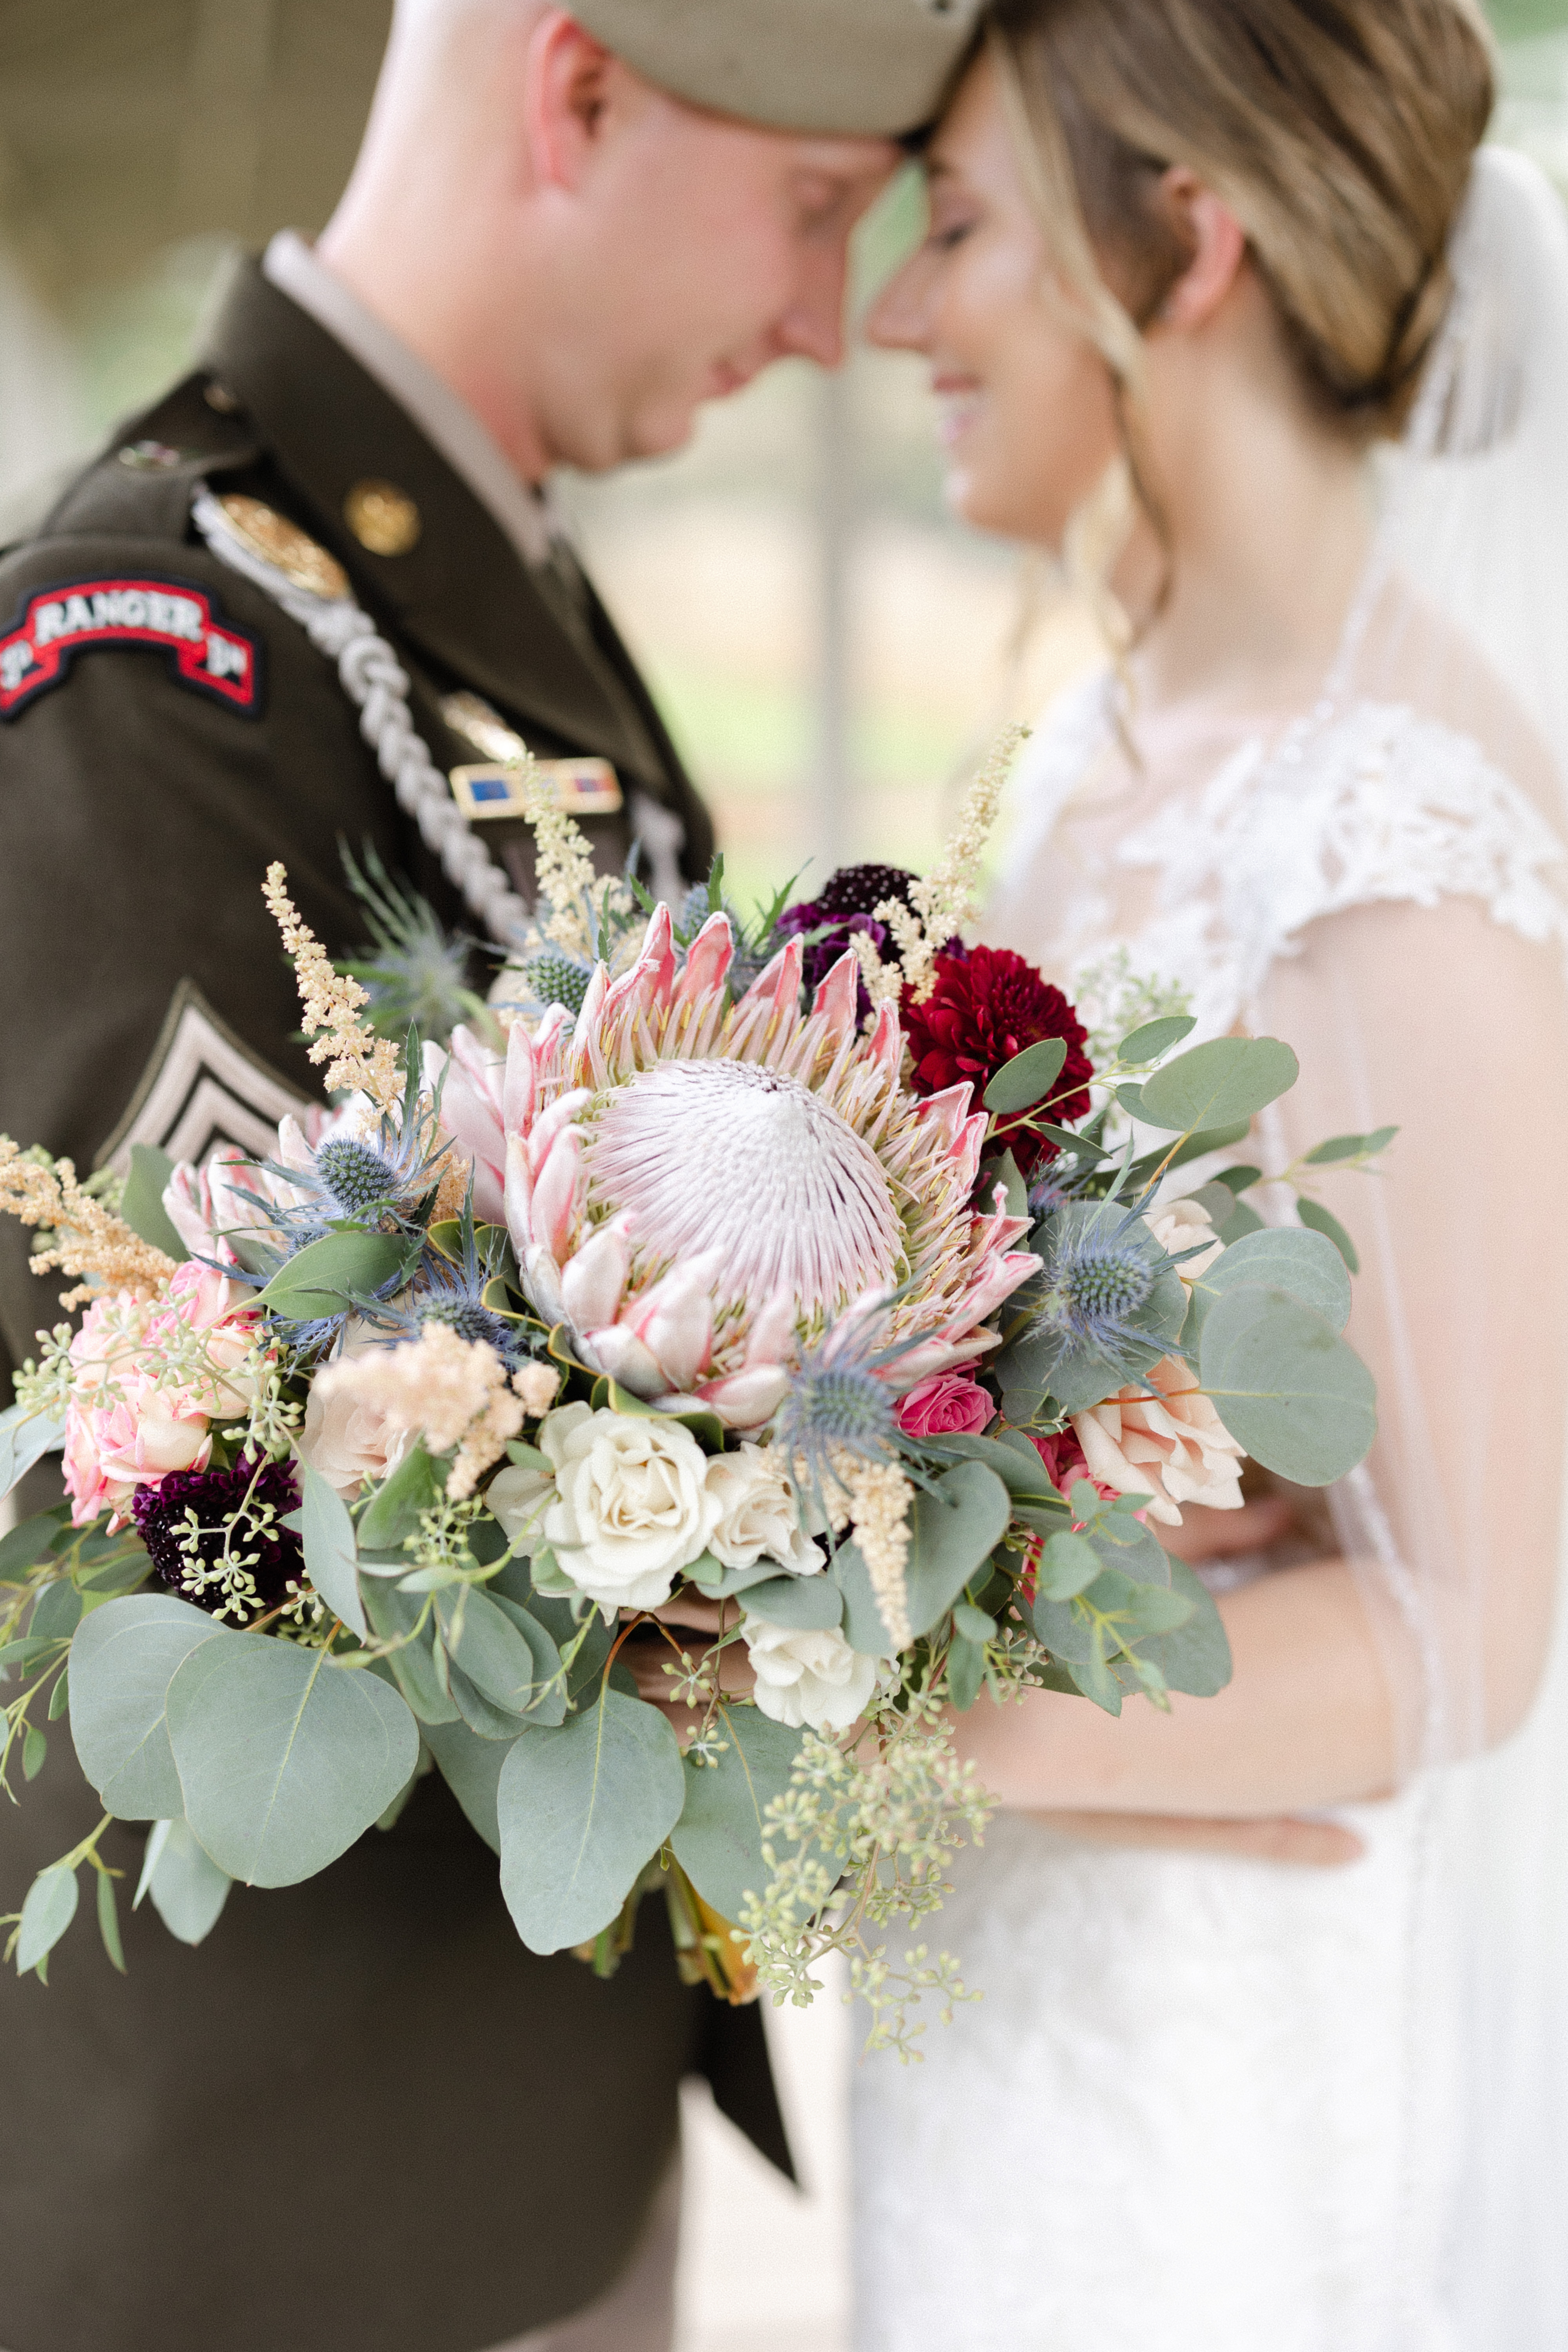 How To Choose Your Bridal Bouquet - Choosing the Best Wedding Bouquet